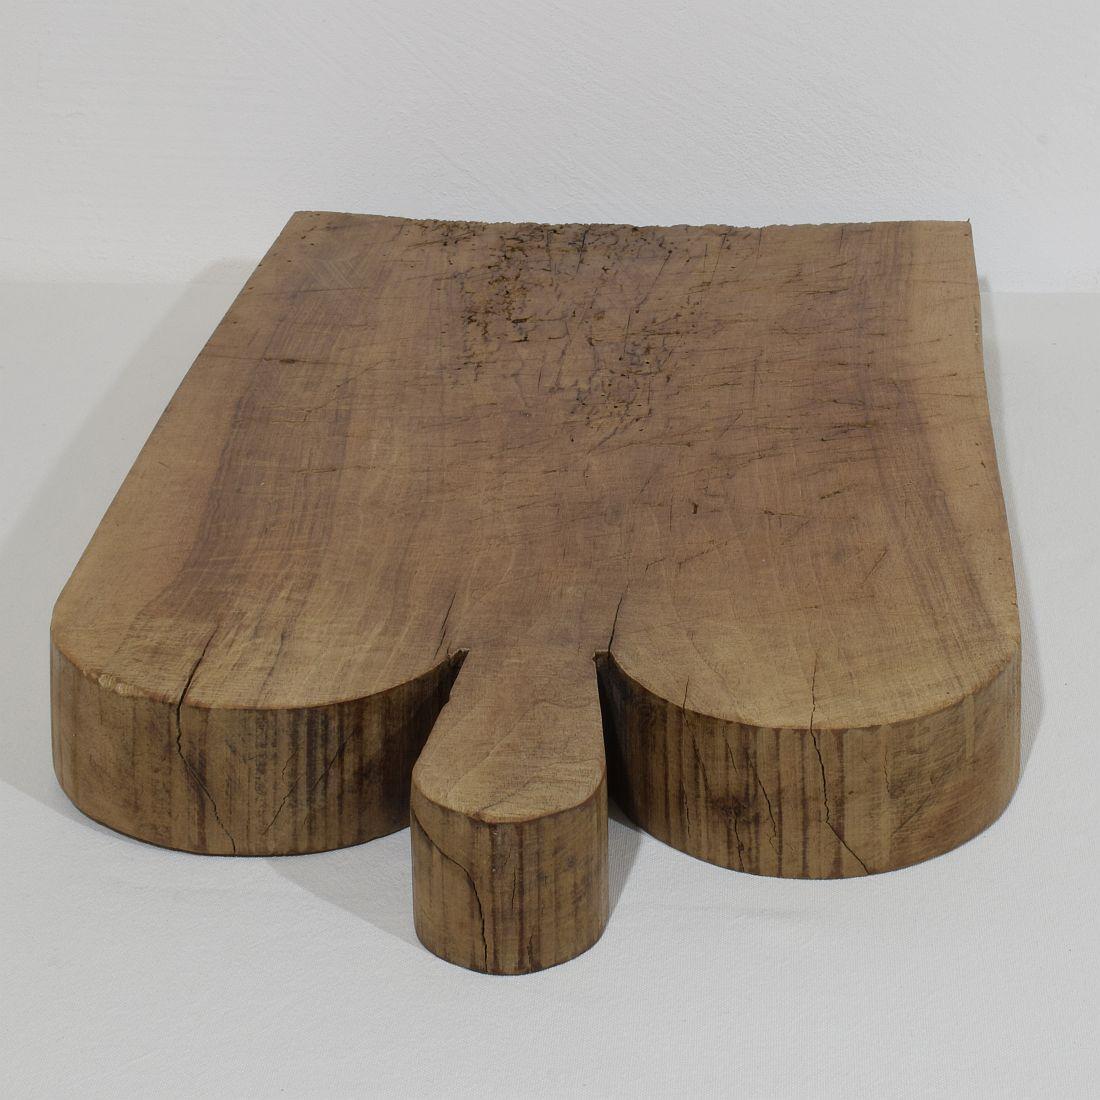 French 19th Century, Thick Wooden Chopping or Cutting Board 13